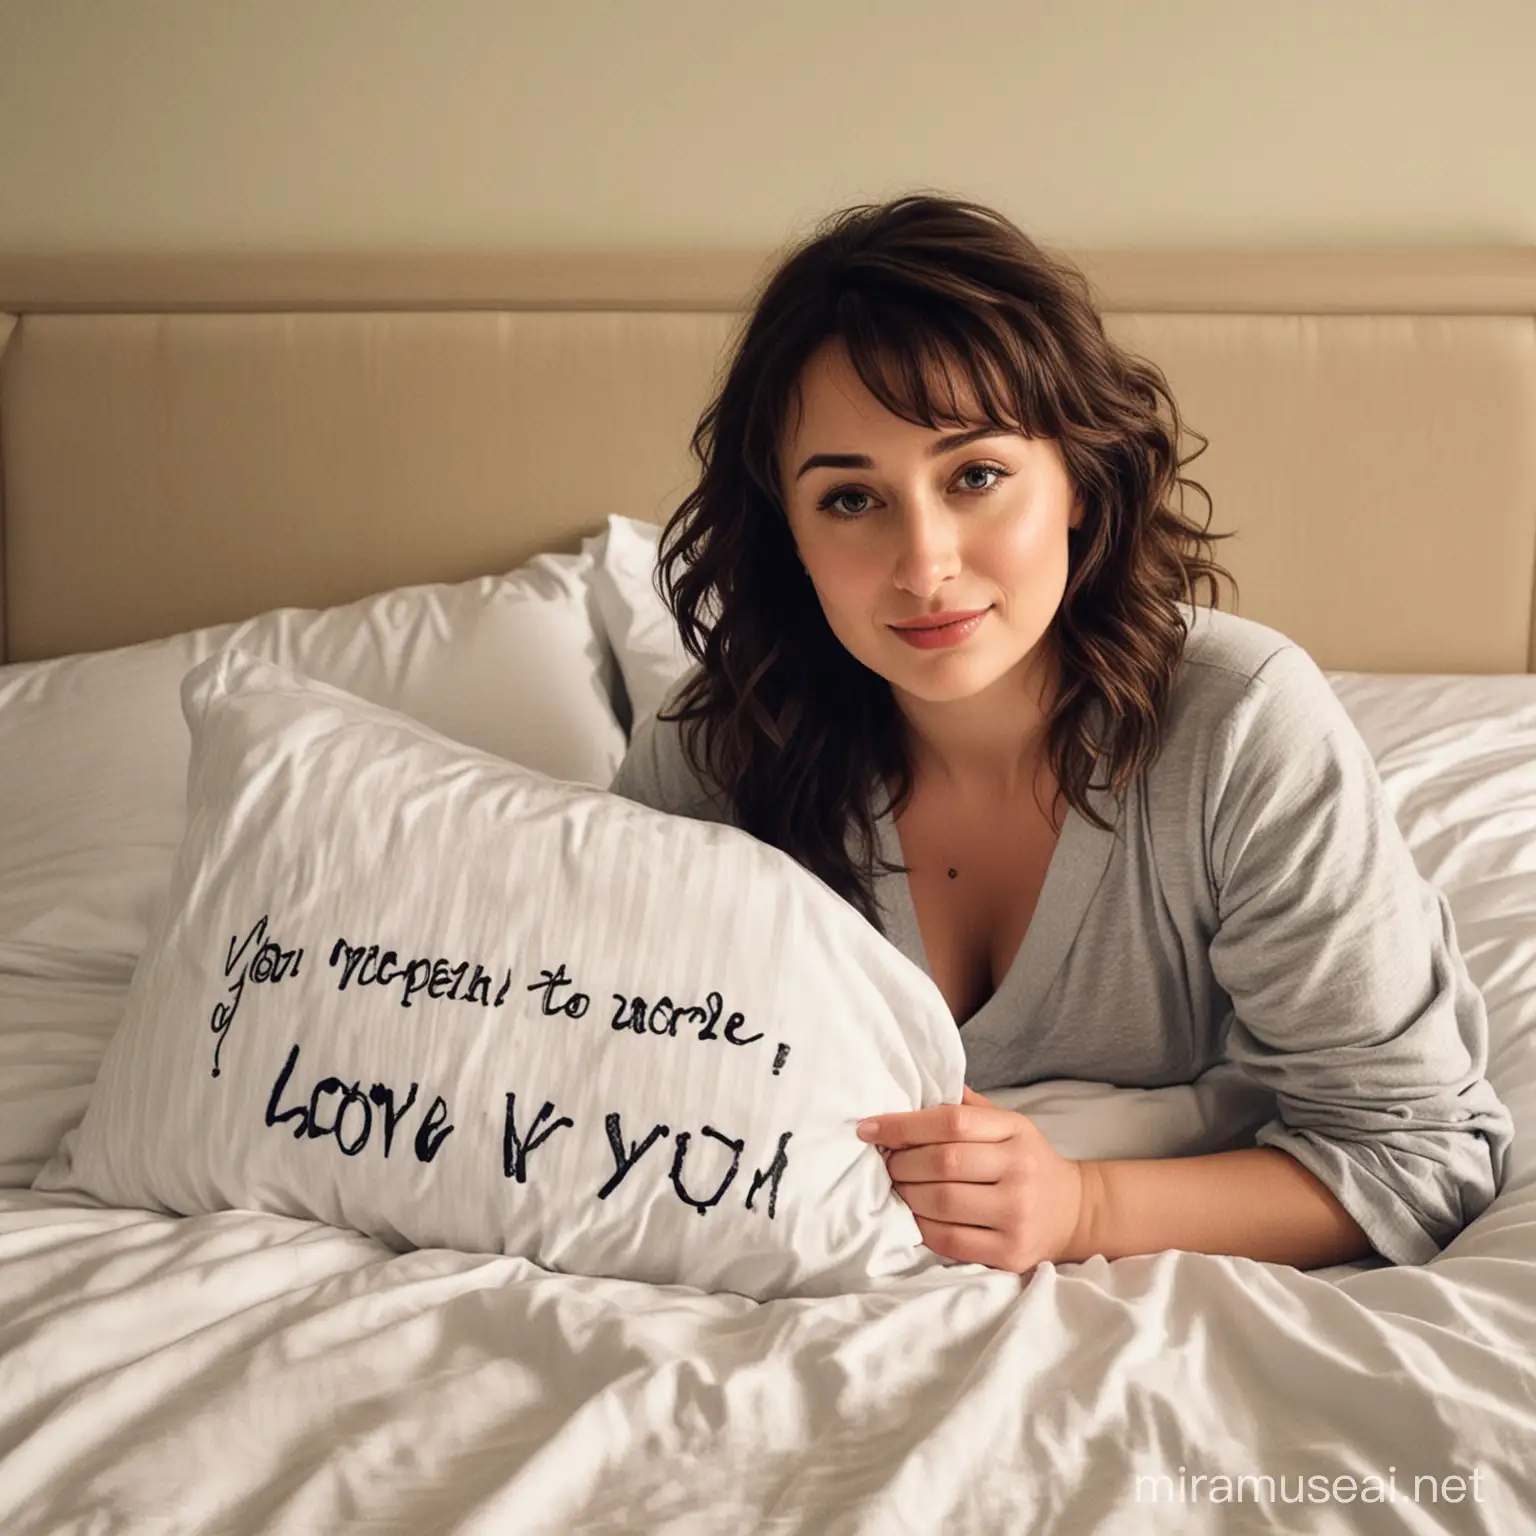 a picture of actress milana vayntrub on a sick bed with a written word, You mean the world to me and more, just know i love you Jack Stephen Hubbard